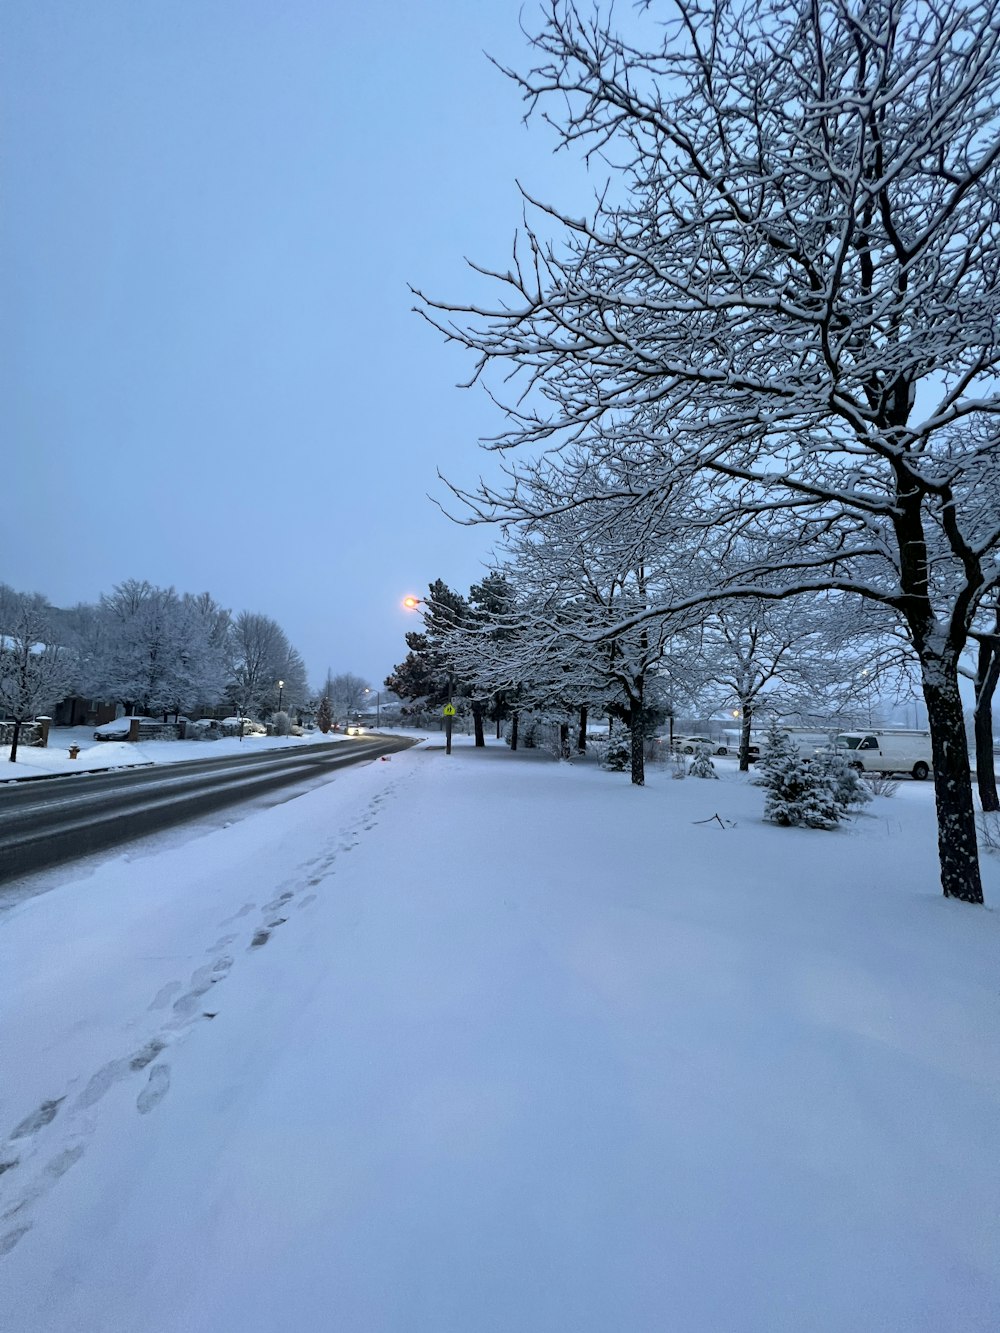 a snowy street lined with trees and a street light